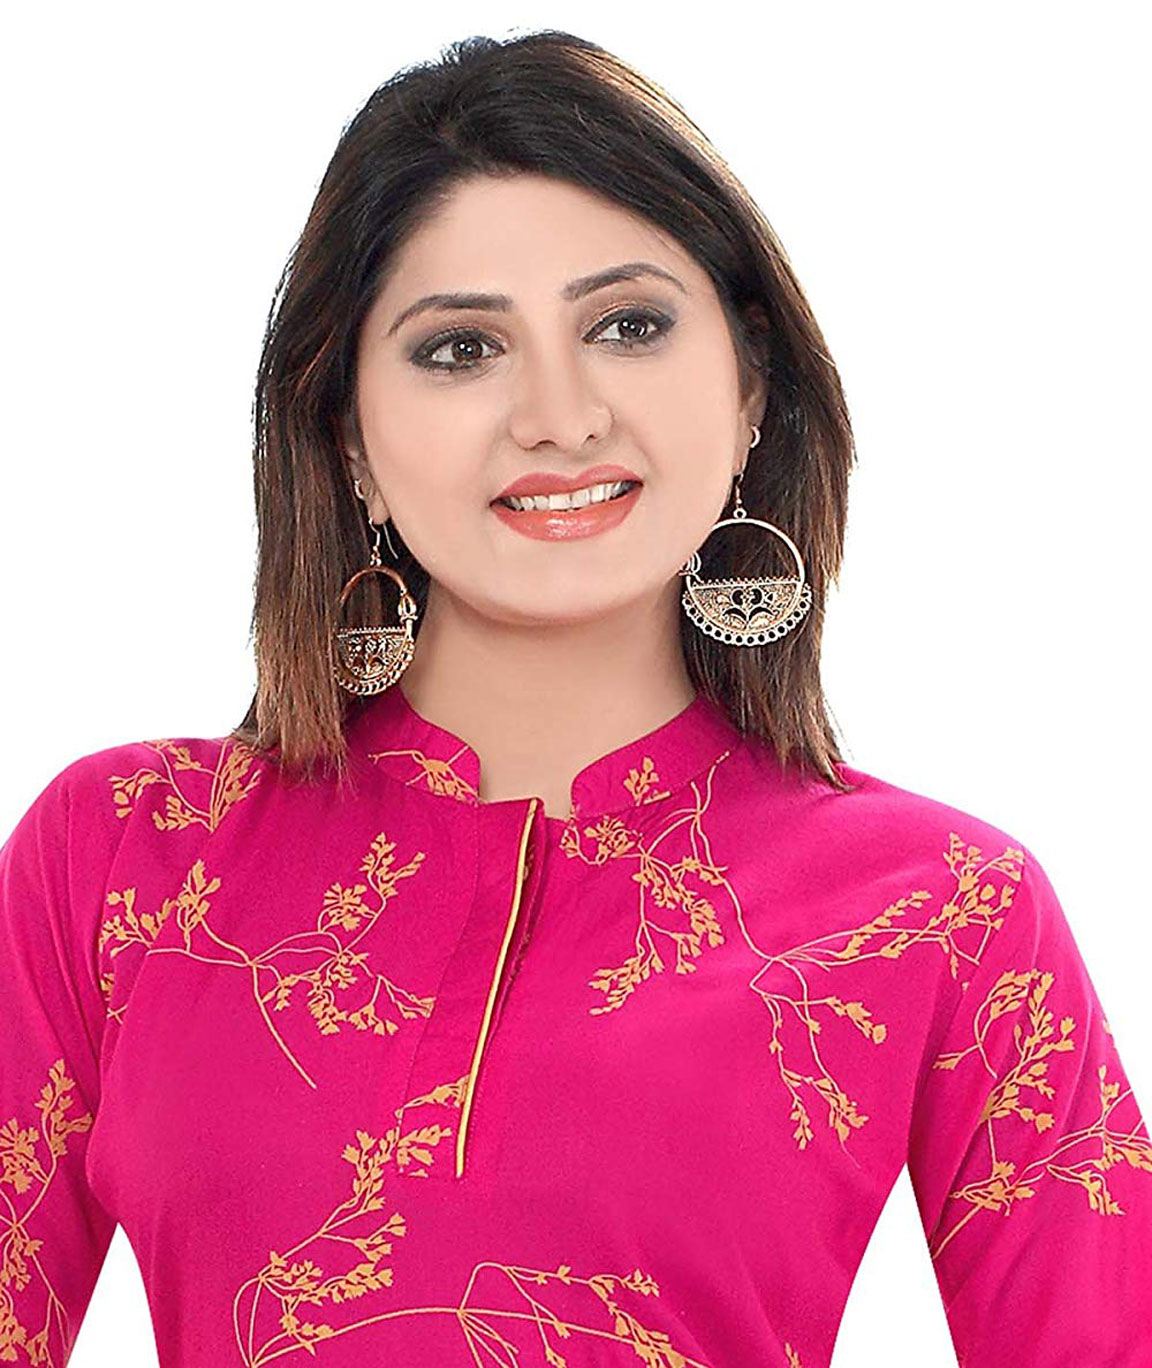 Why Limit Yourself with Regular Kurtis When You Have the CCut Kurti  Amazing CCut Kurti Designs for Ladies Who Love Little Quirk in Their Kurtis 